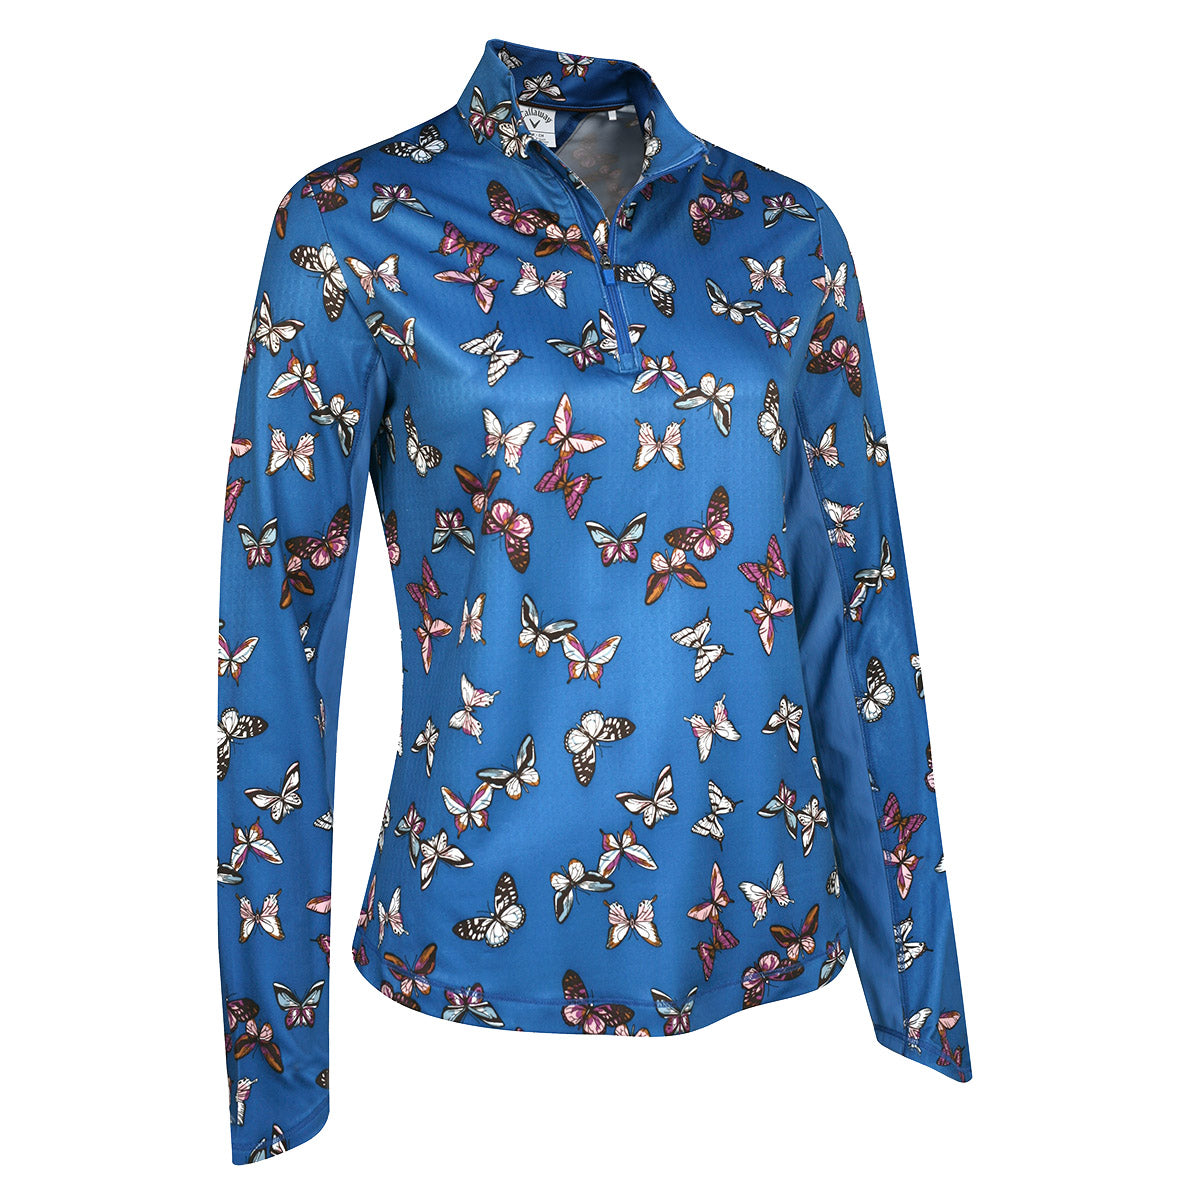 Callaway Ladies Butterfly Print Sun Protection Top in Baleine Blue